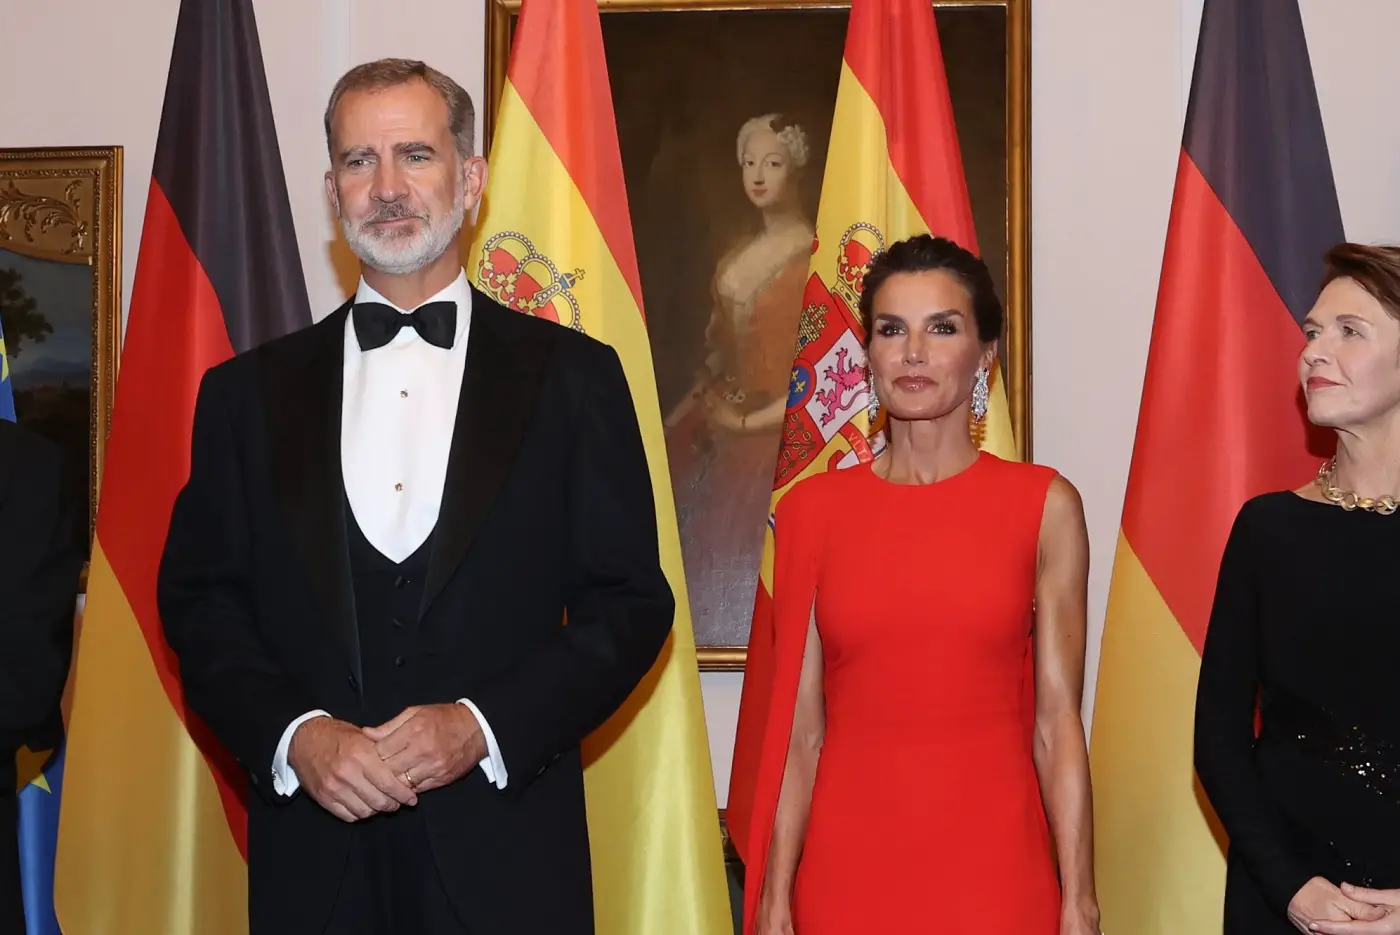 King Felipe and Queen Letizia of Spain attended State Banquet in Germany